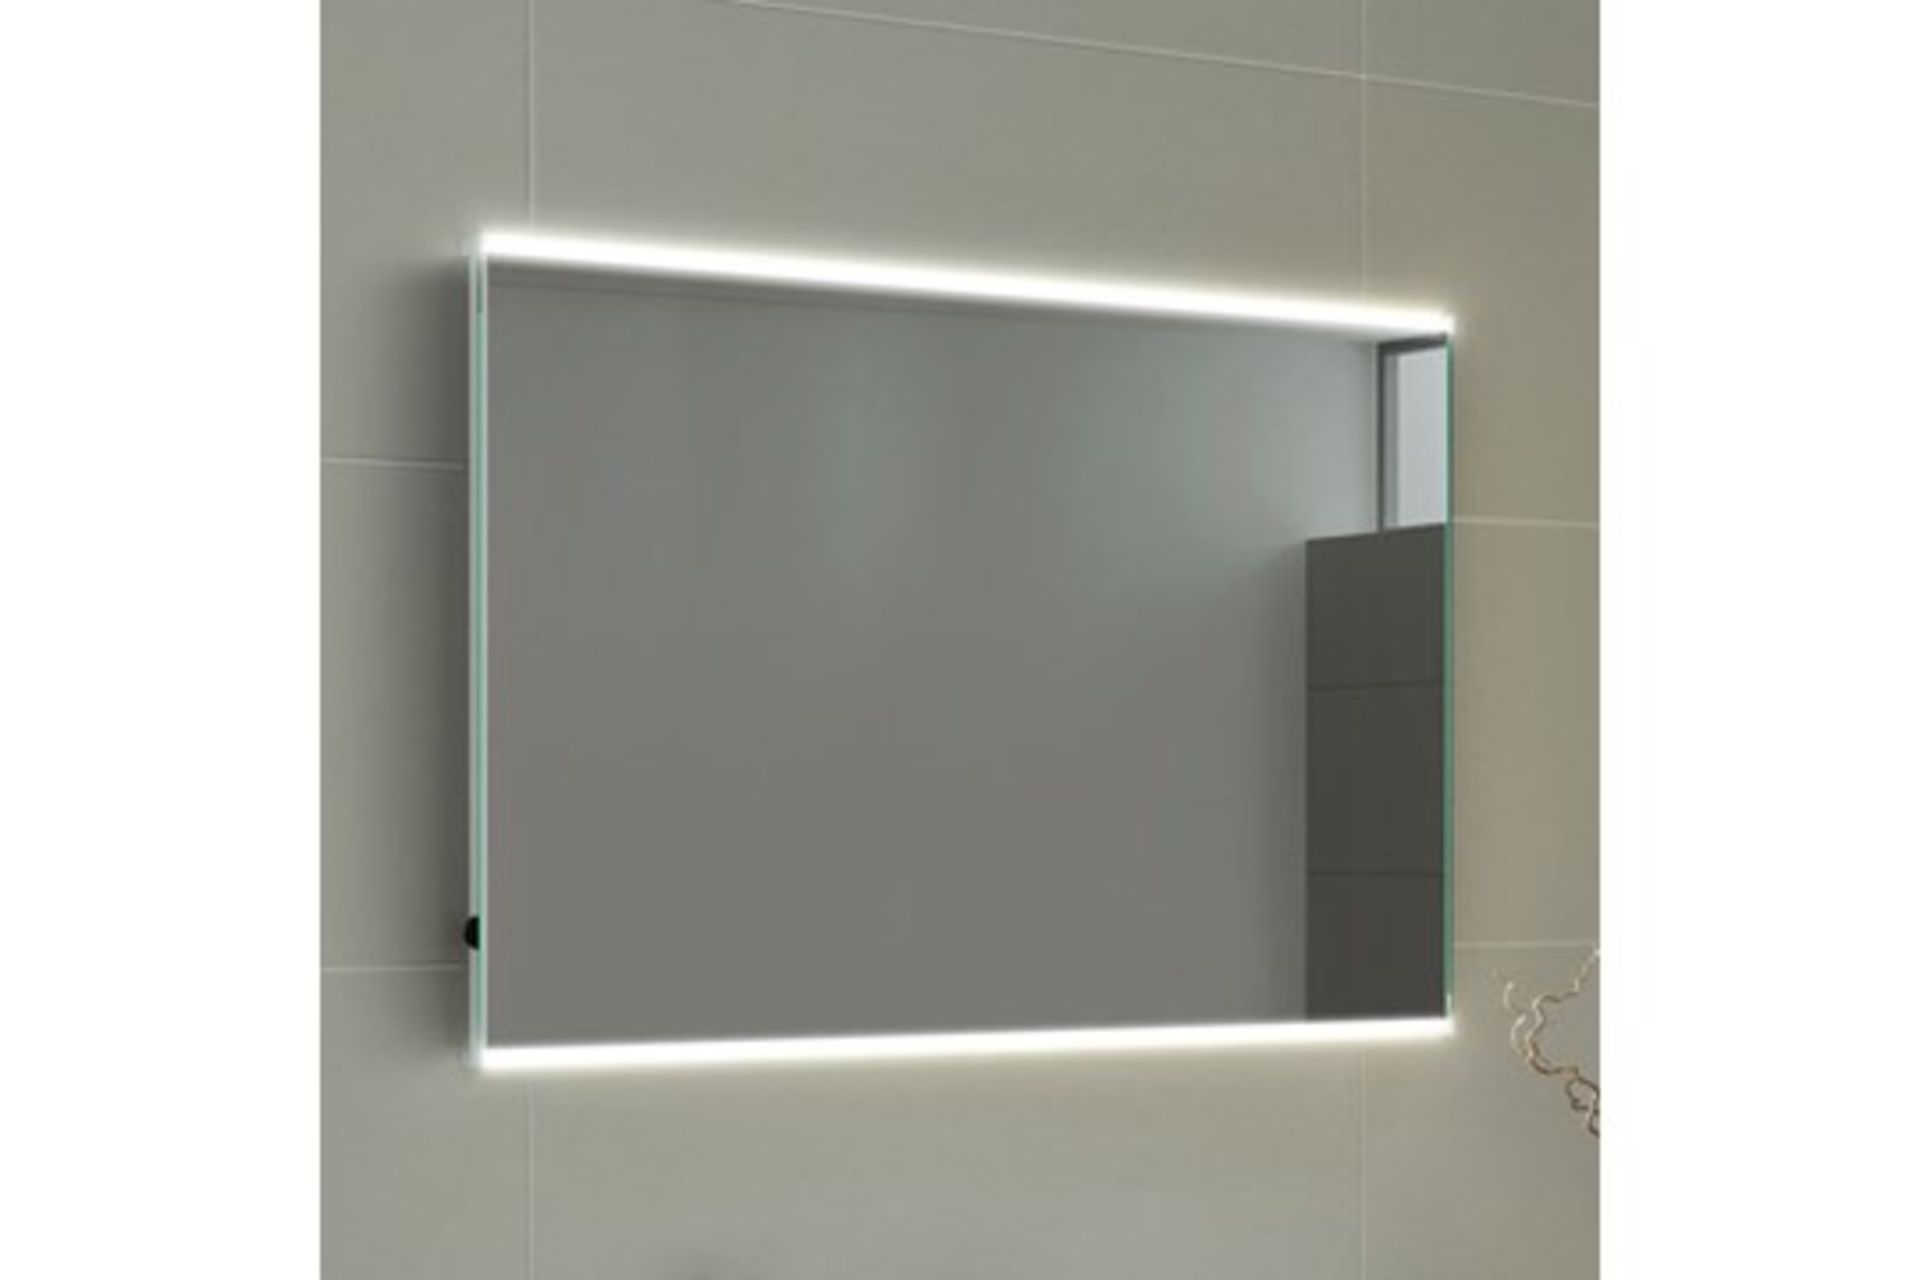 (ZL289) 500x700mm Denver Illuminated LED Mirror - Battery Operated. - Image 4 of 5